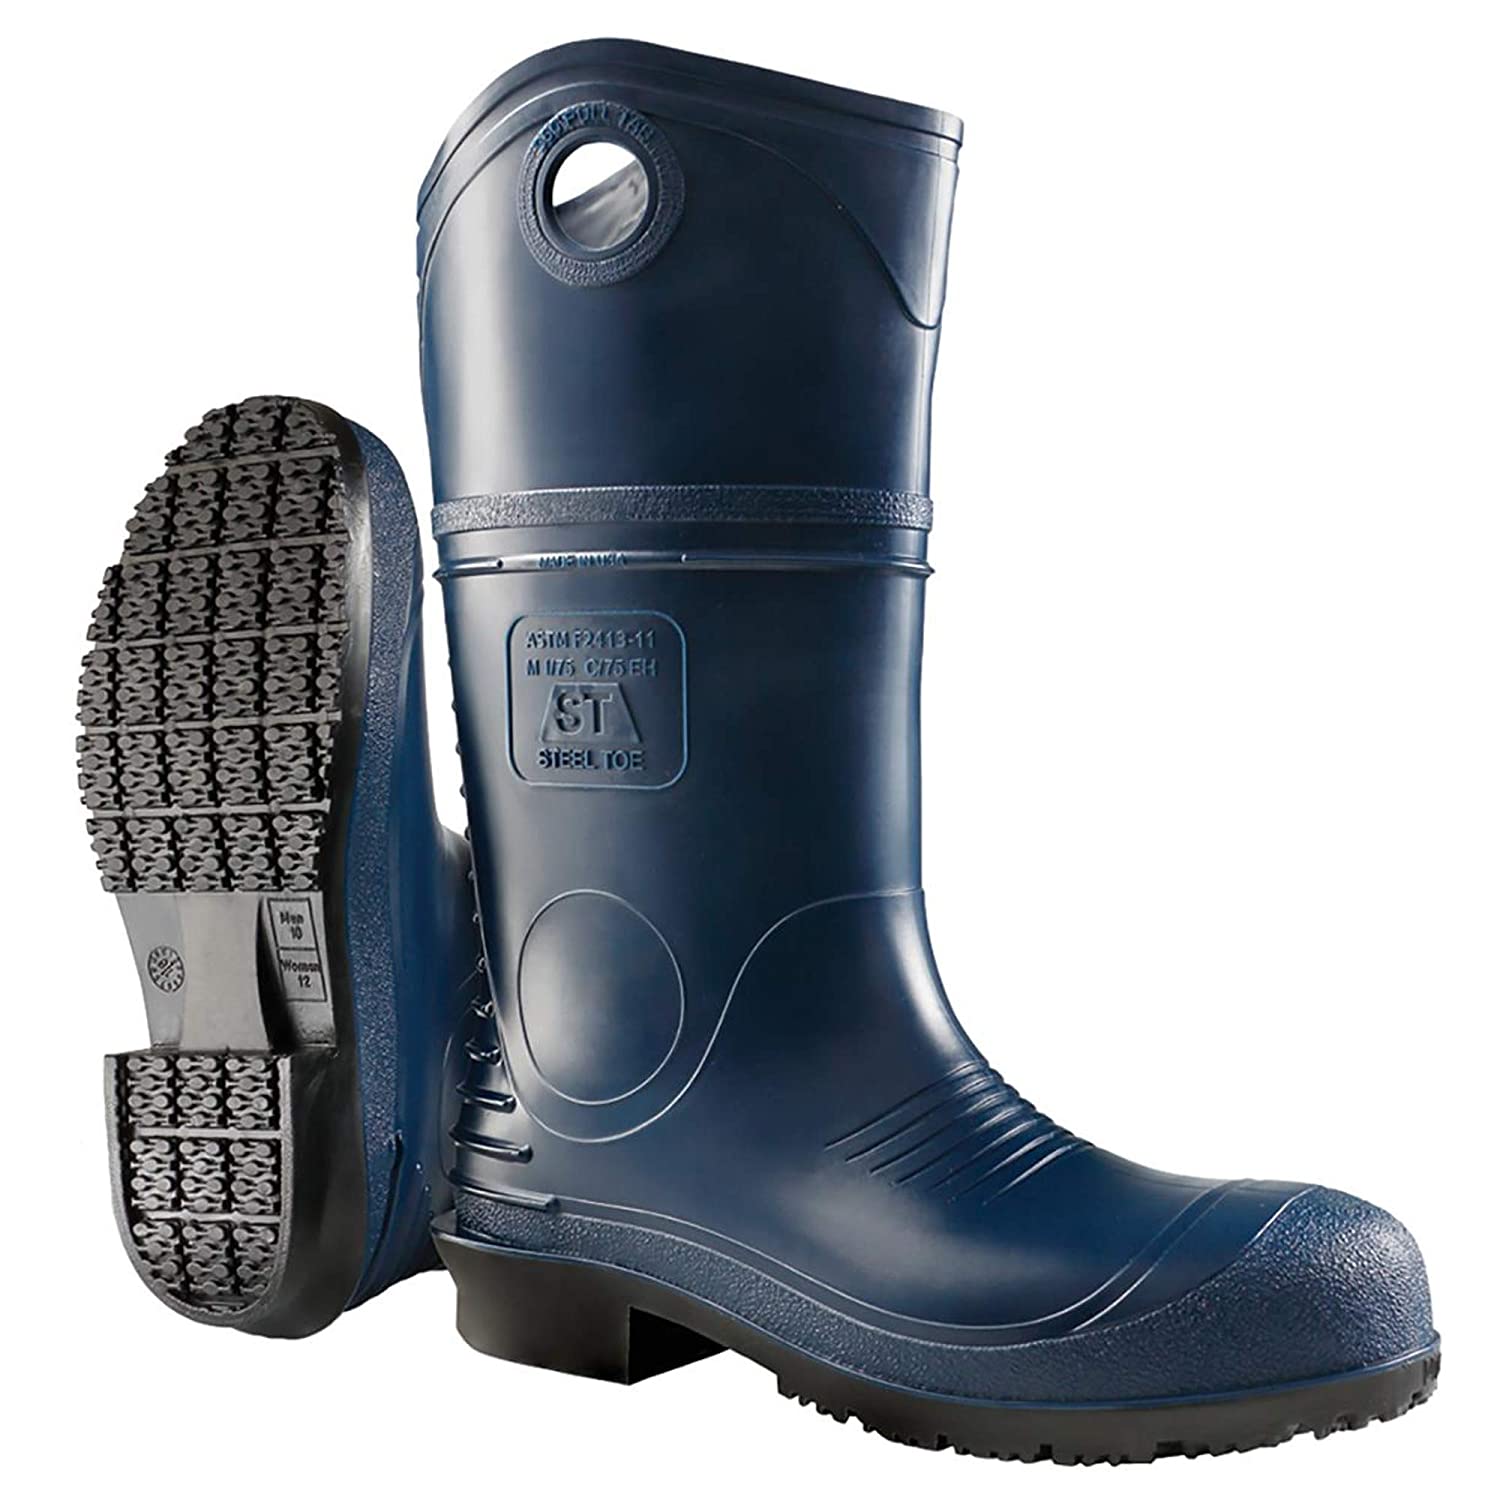 Dunlop, DURAPRO Boots with Safety Steel Toe